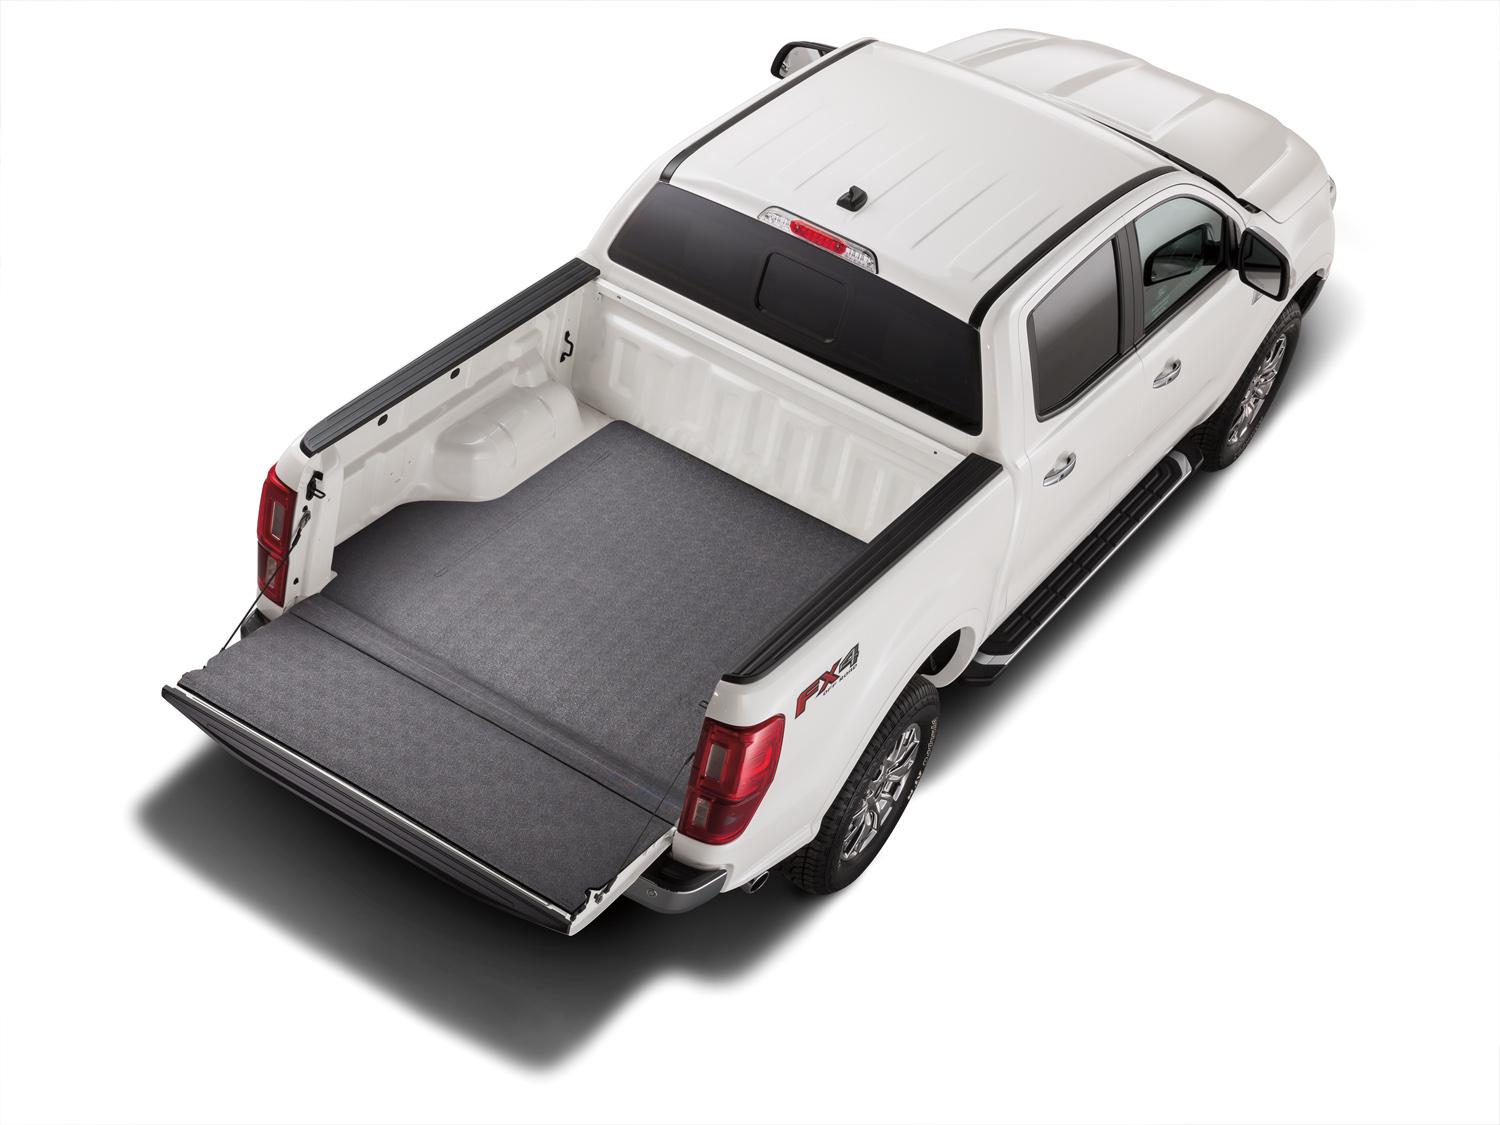 Image for Bed Mat - Impact, Heavy-Duty For 5.0 Bed from AccessoriesCanada